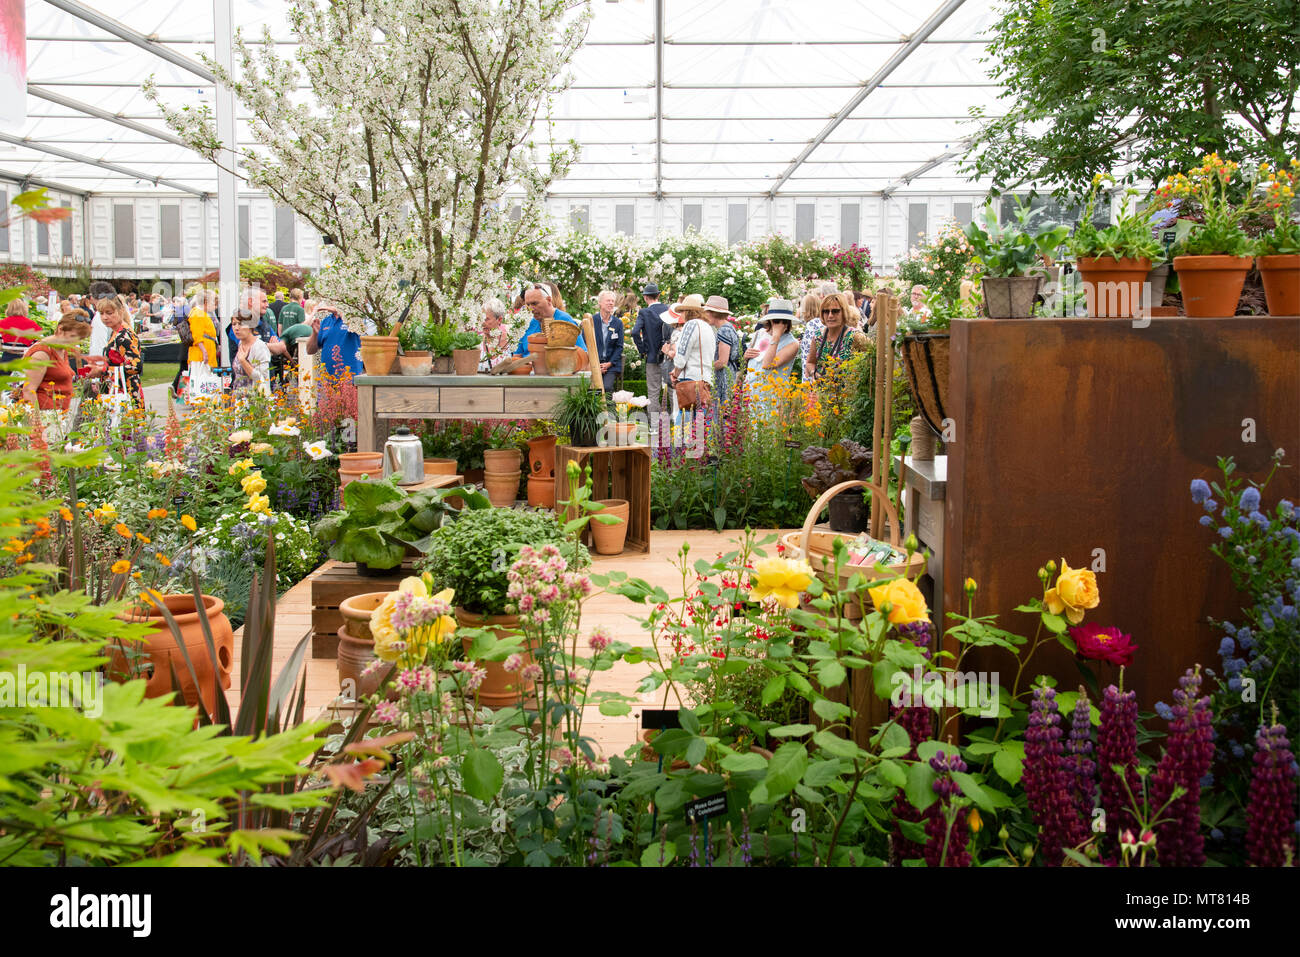 Visitors In The Marquee At The Rhs Chelsea Flower Show 2018 London Uk Stock Photo Alamy